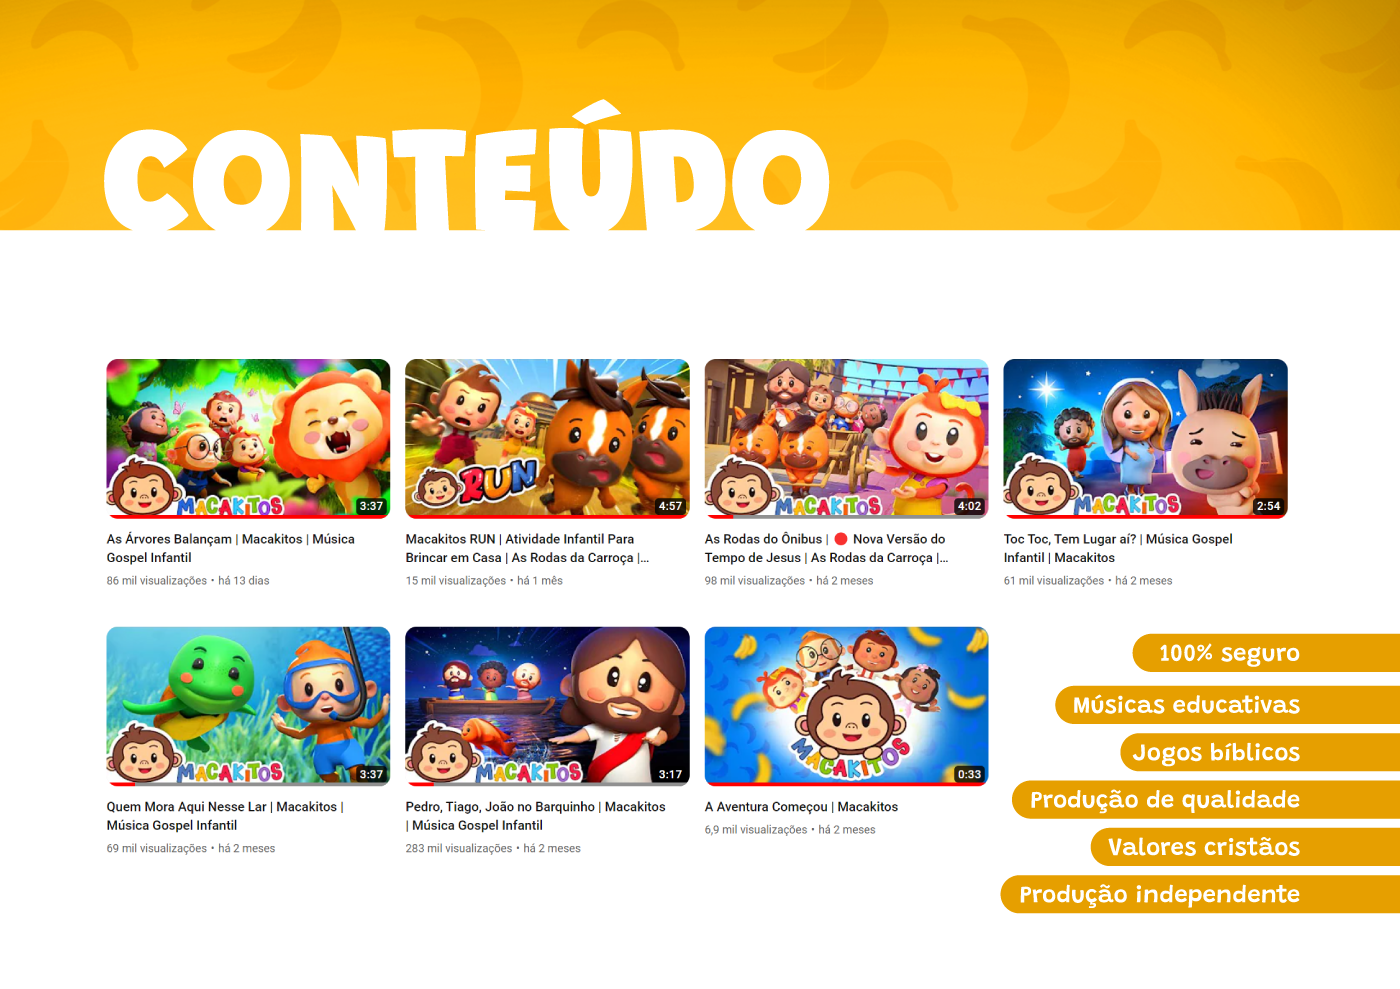 Canal Youtube canal infantil kids macacos 3D music macakitos Musica Cristã